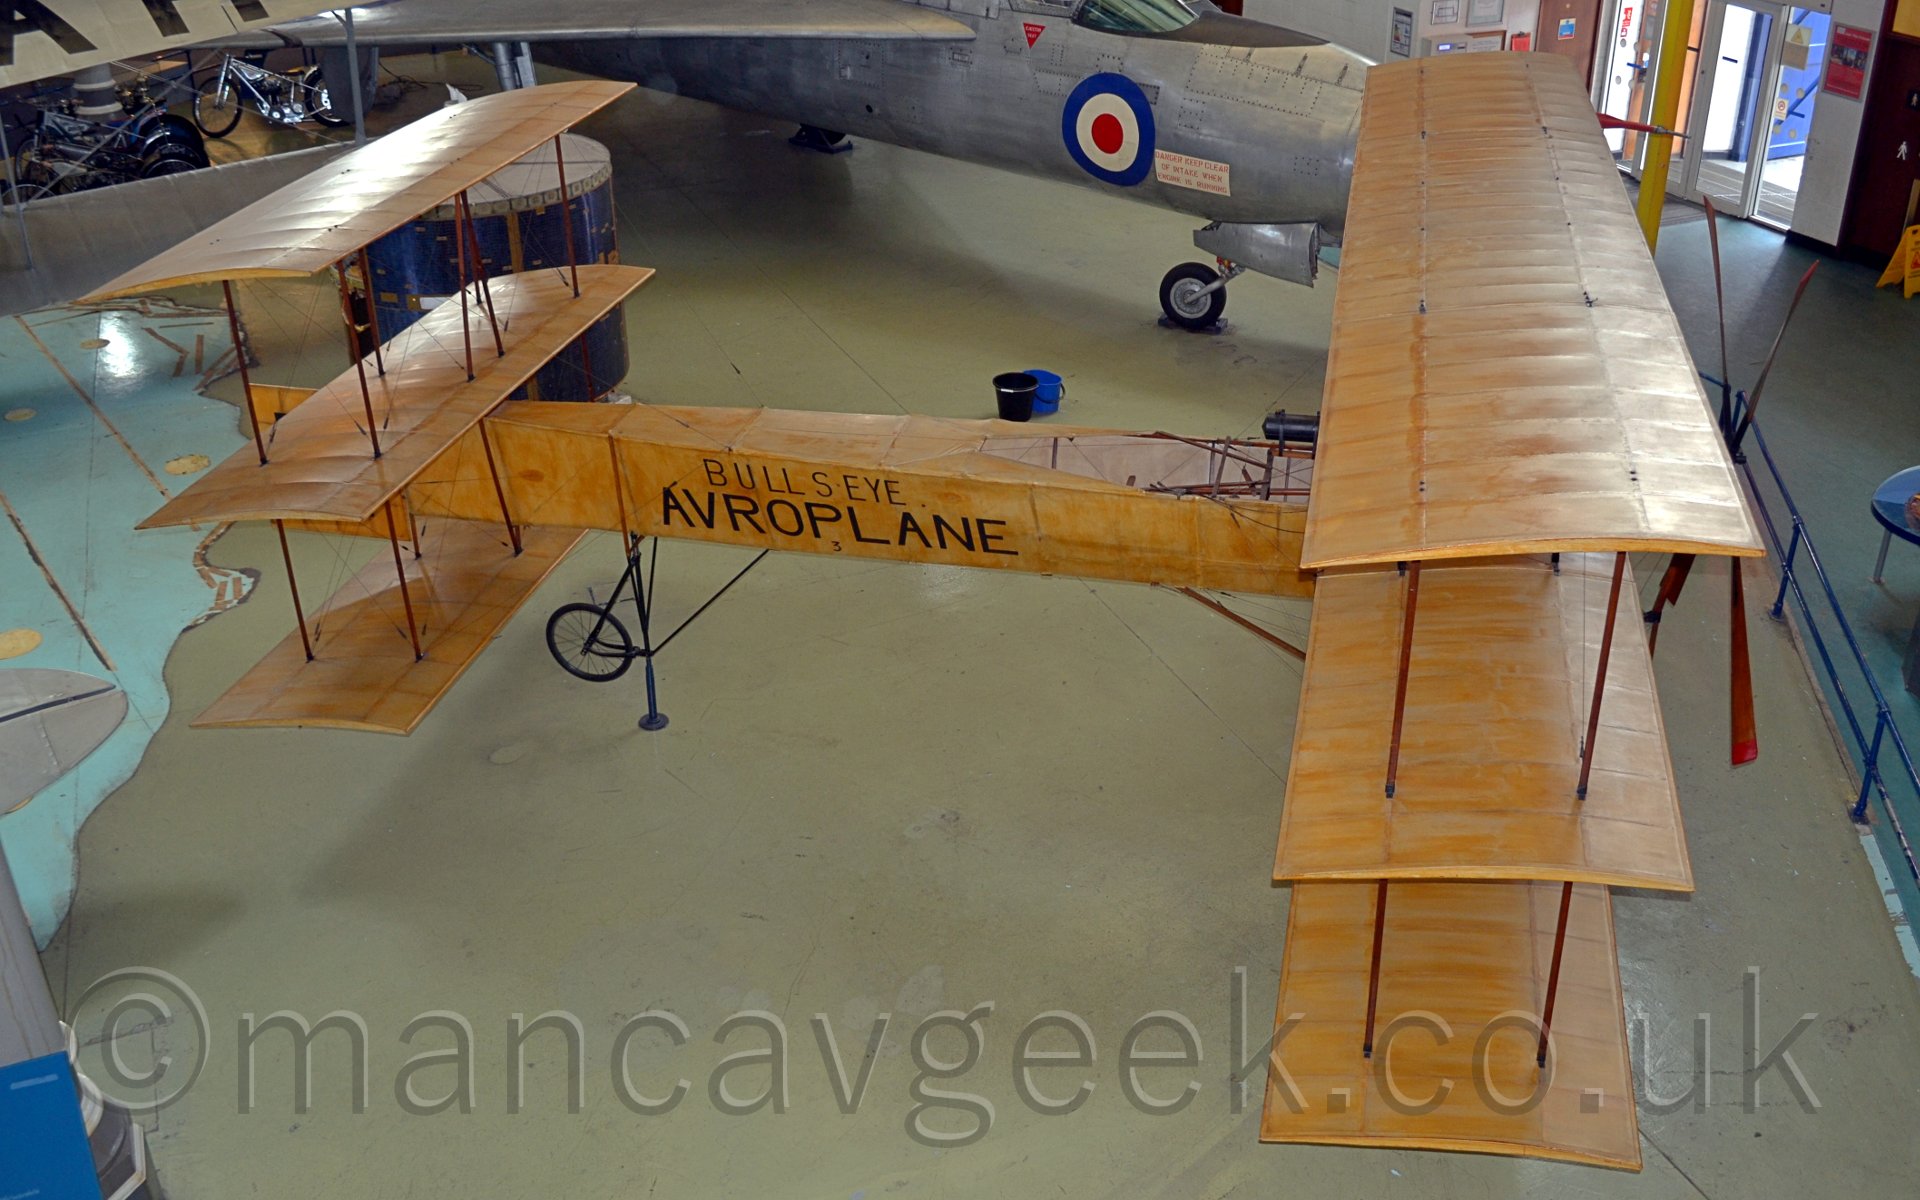 High side view of a brown tri-plane facing to the right in a museum. The plane's 3 wings right at the front behind the propellor are matched by the 3 tailplanes right at the rear. There are black "Bulls Eye" and "Avroplane" titles in the middle of the fuselage, the former over the latter. Behind is a silver jet fighter aircraft, and other exhibits in the museum.